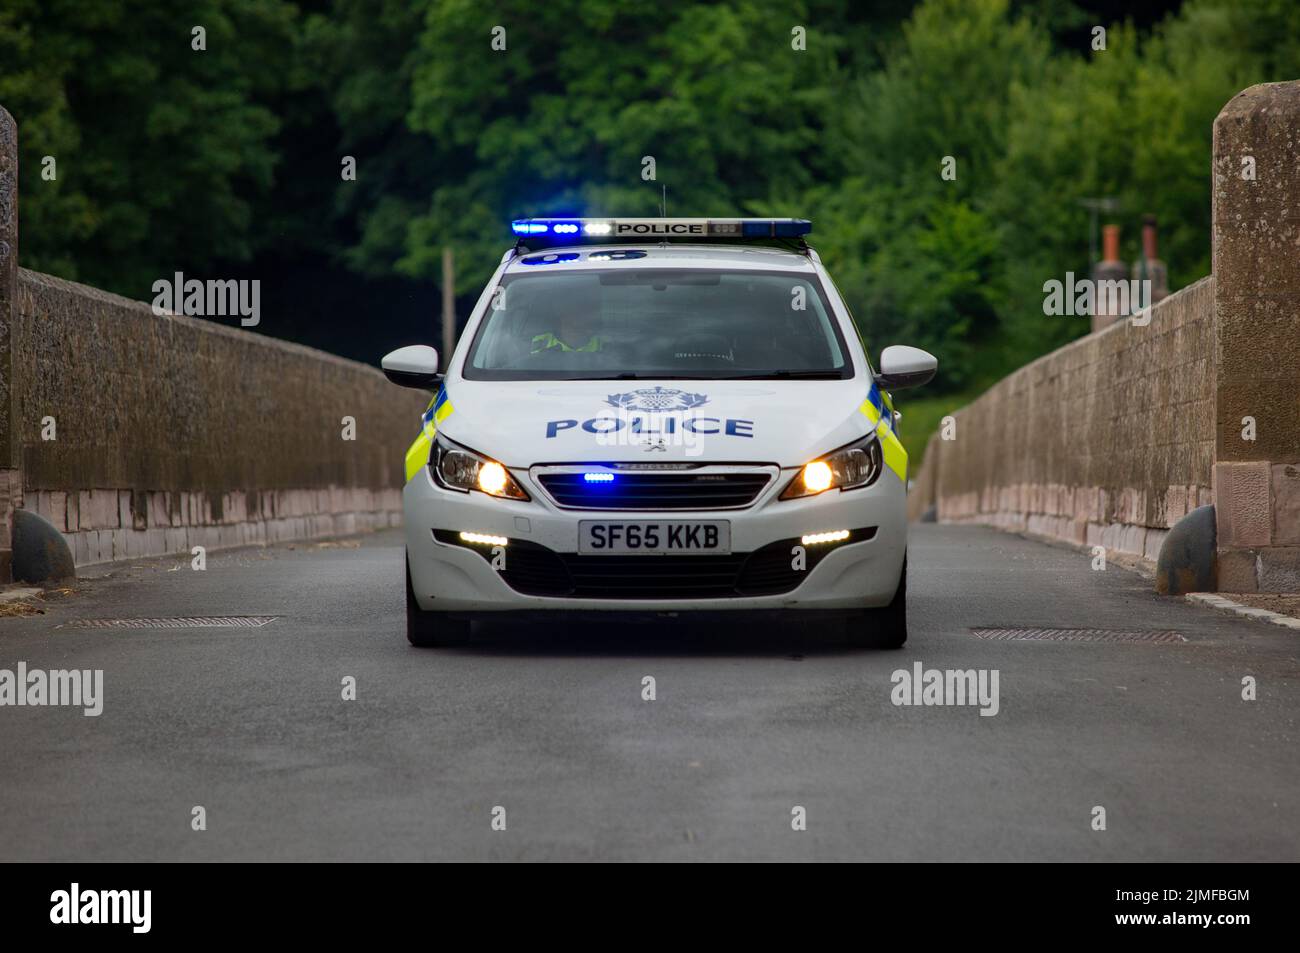 Police Scotland, Peugeot 308, Incident Response Vehicle SF65 KKB operating in the Scottish Borders. Stock Photo